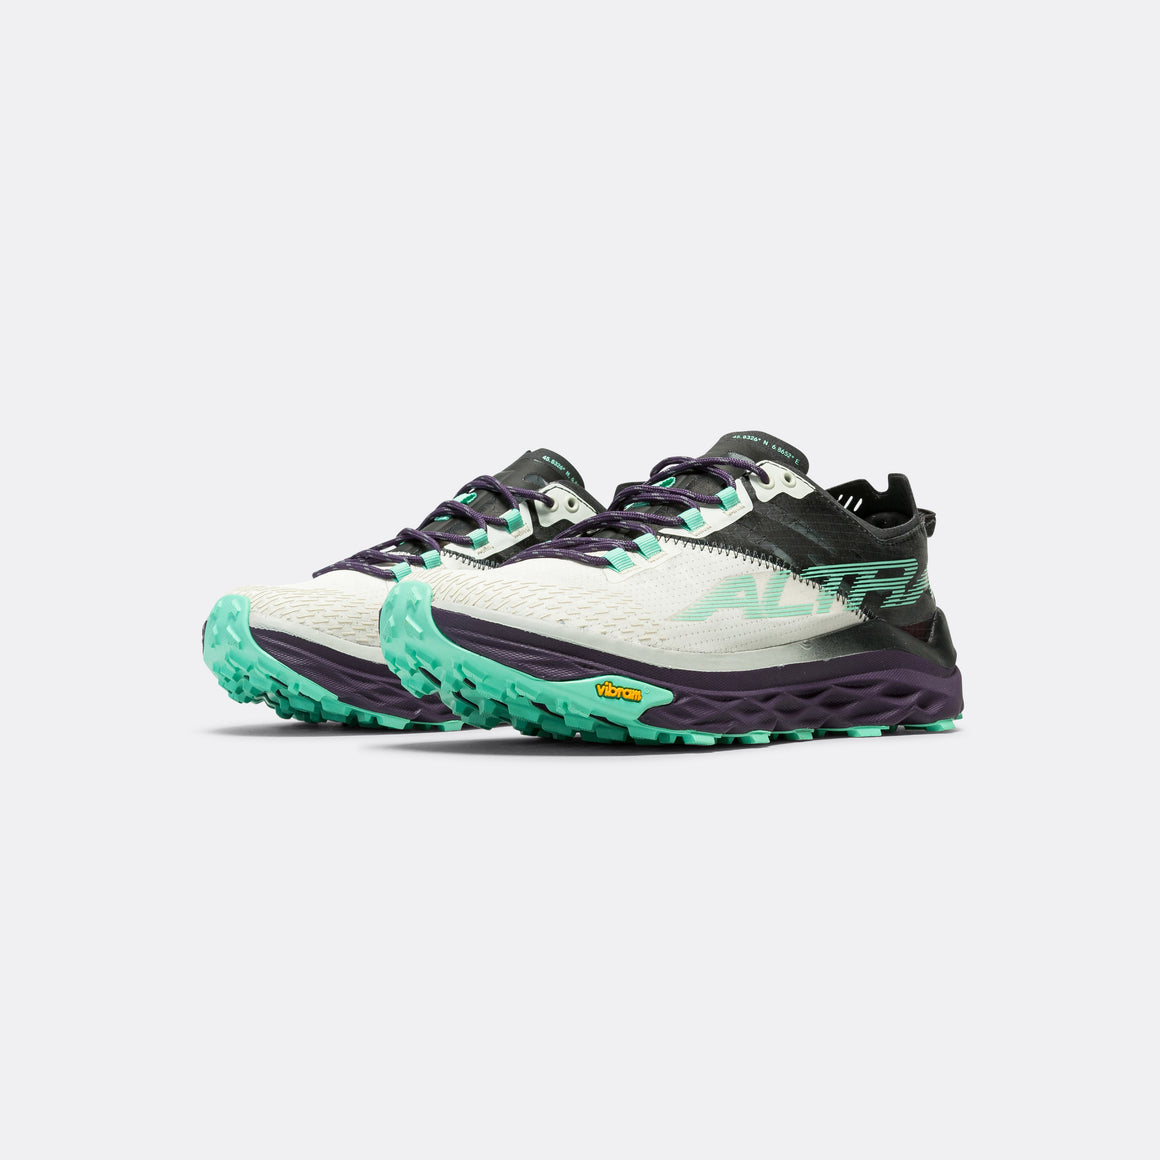 Altra - Womens Mont Blanc - Black/Green - Up There Athletics